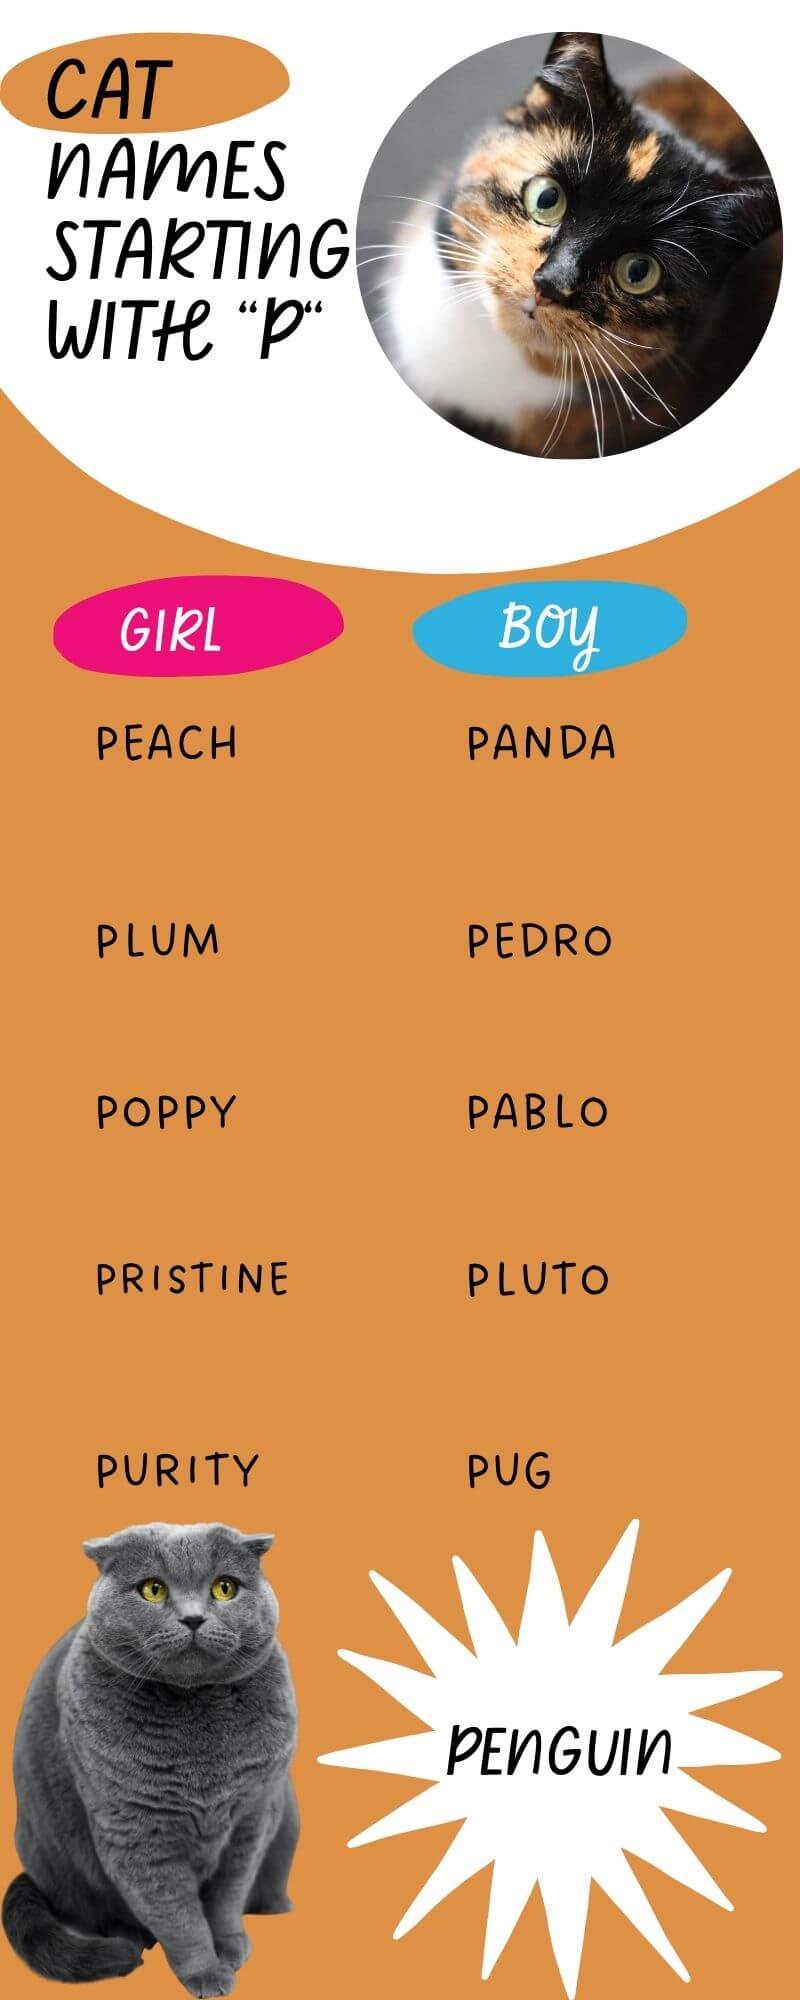 An infographic showing the list of 11 Cat Names Starting with P